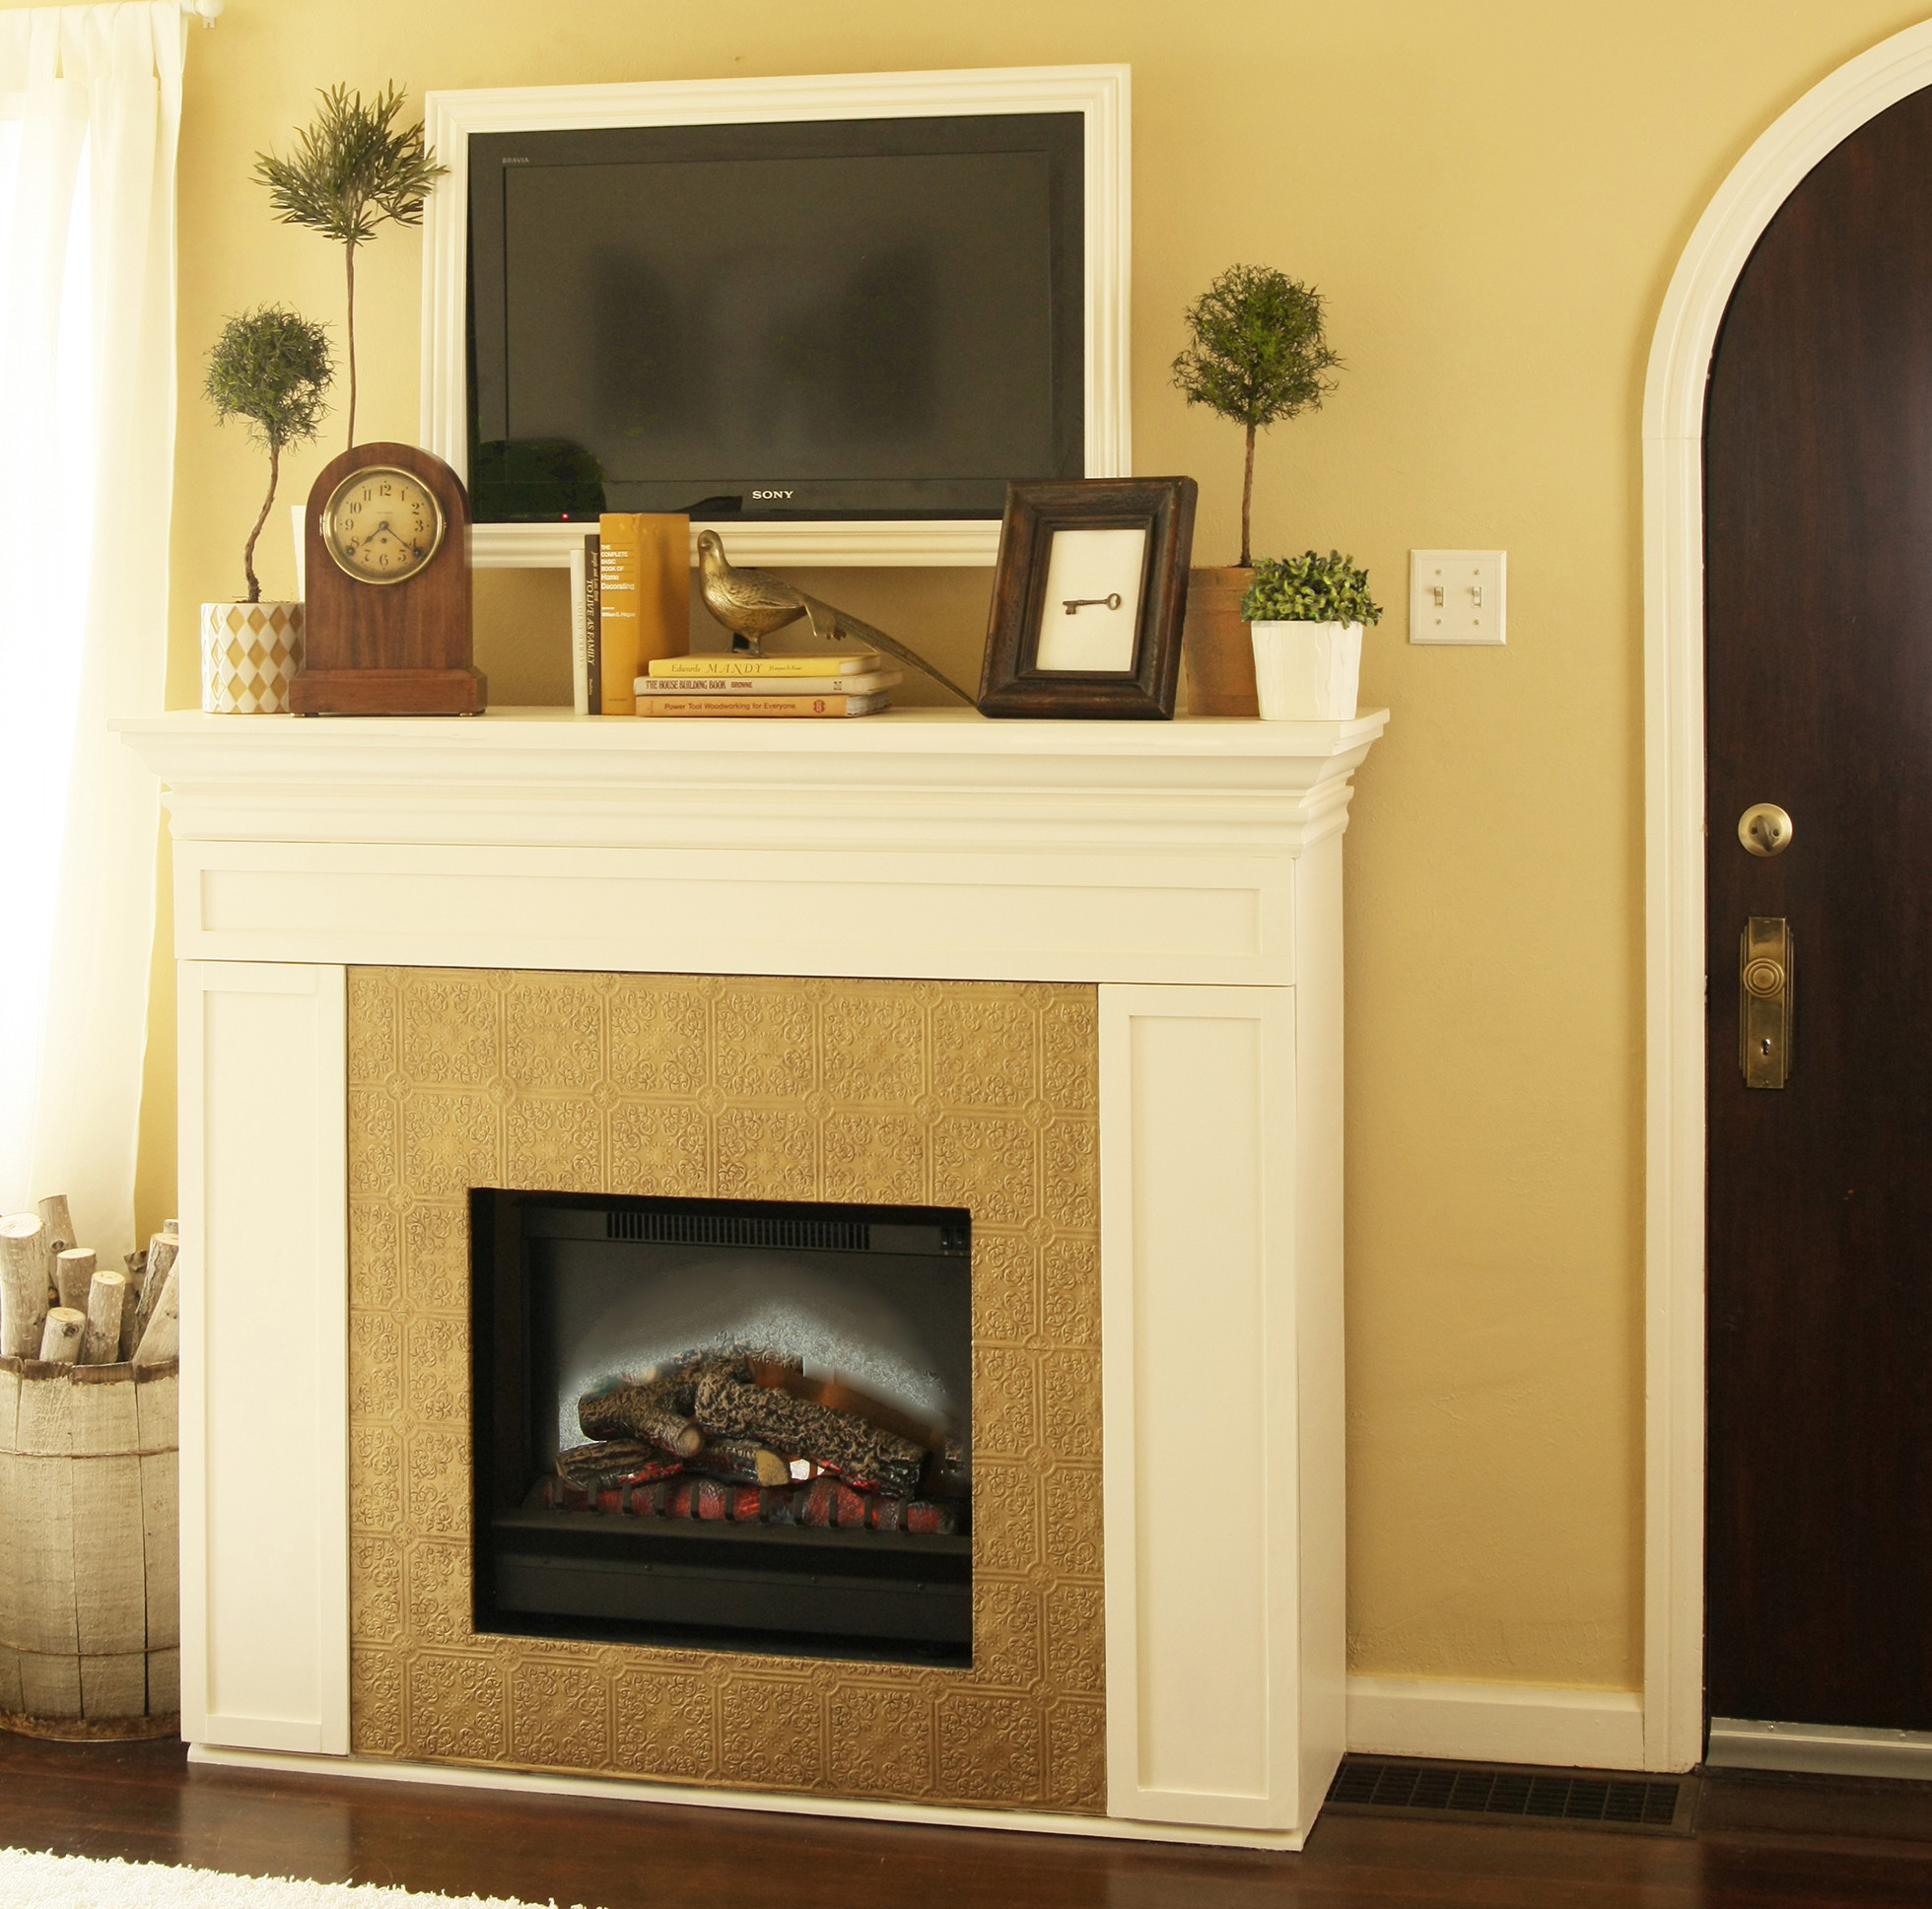 Convert Gas Fireplace To Electric
 Convert Fireplace to Gas